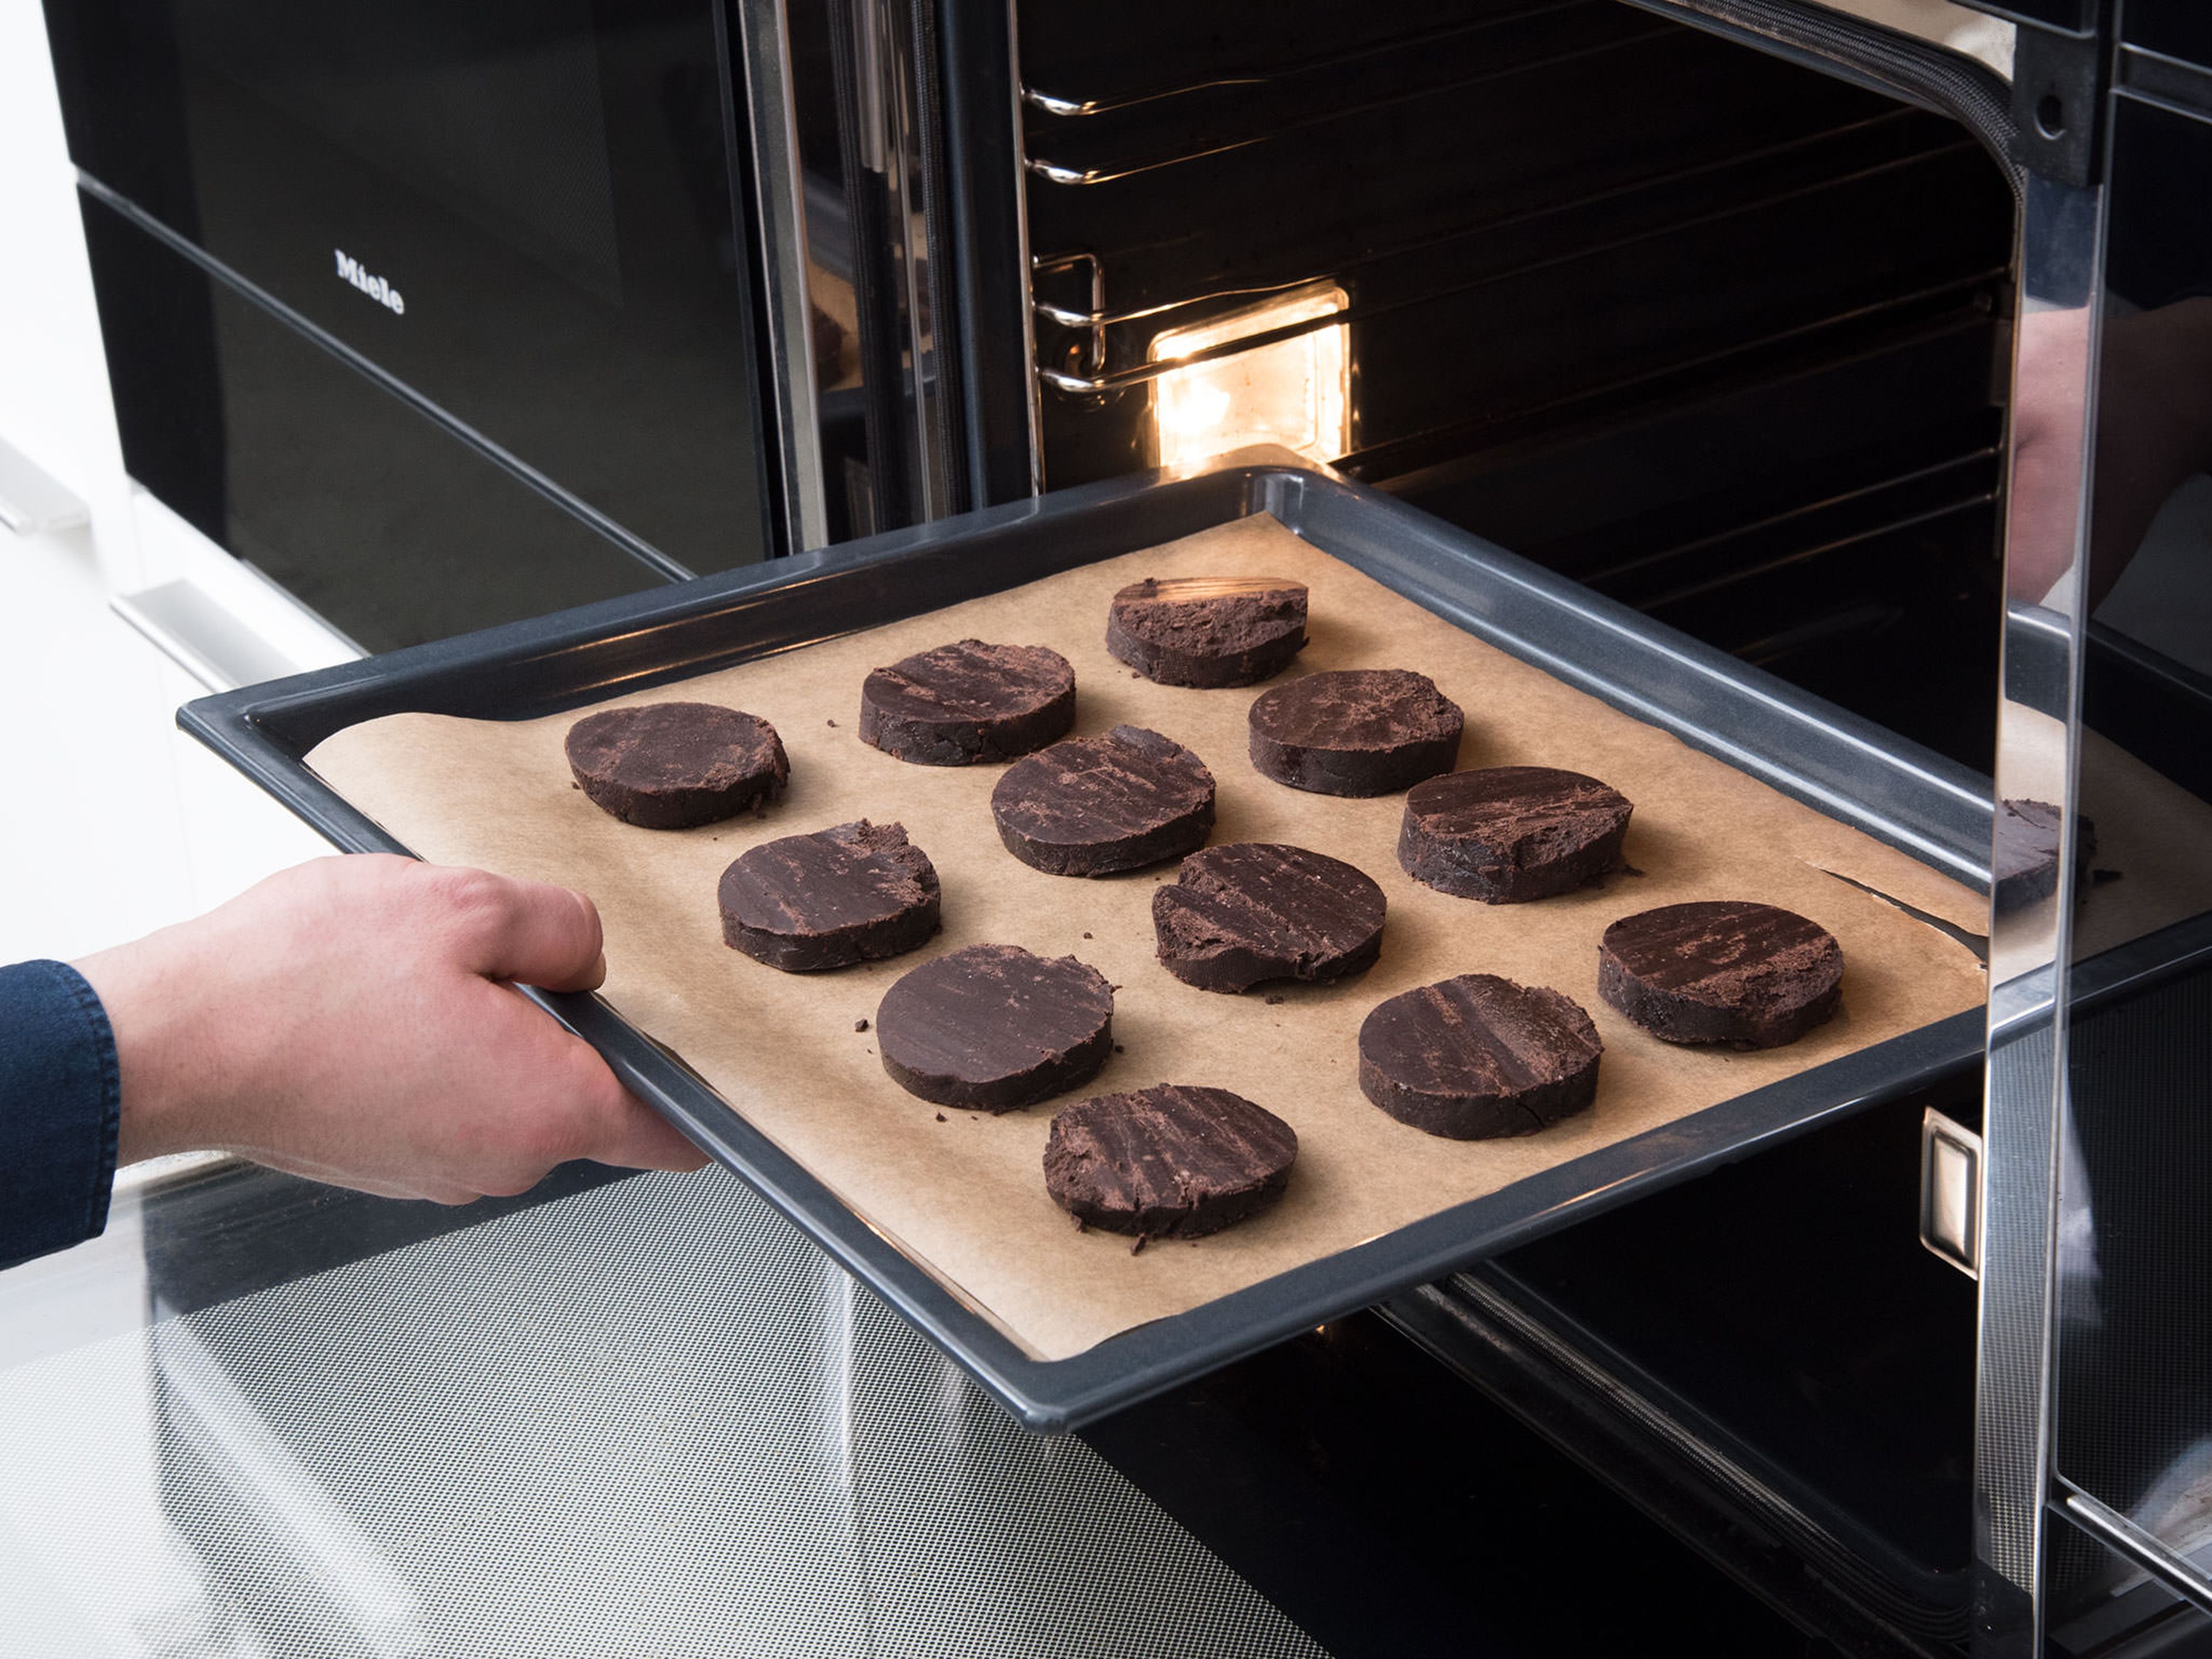 Pre-heat oven to 175°C/350°F. Cut the log into 1-cm/0.5 in. thick circles. Lay them onto a lined baking sheet. Bake cookies for approx. 10 – 12 min. Let cool for approx. 30 min.